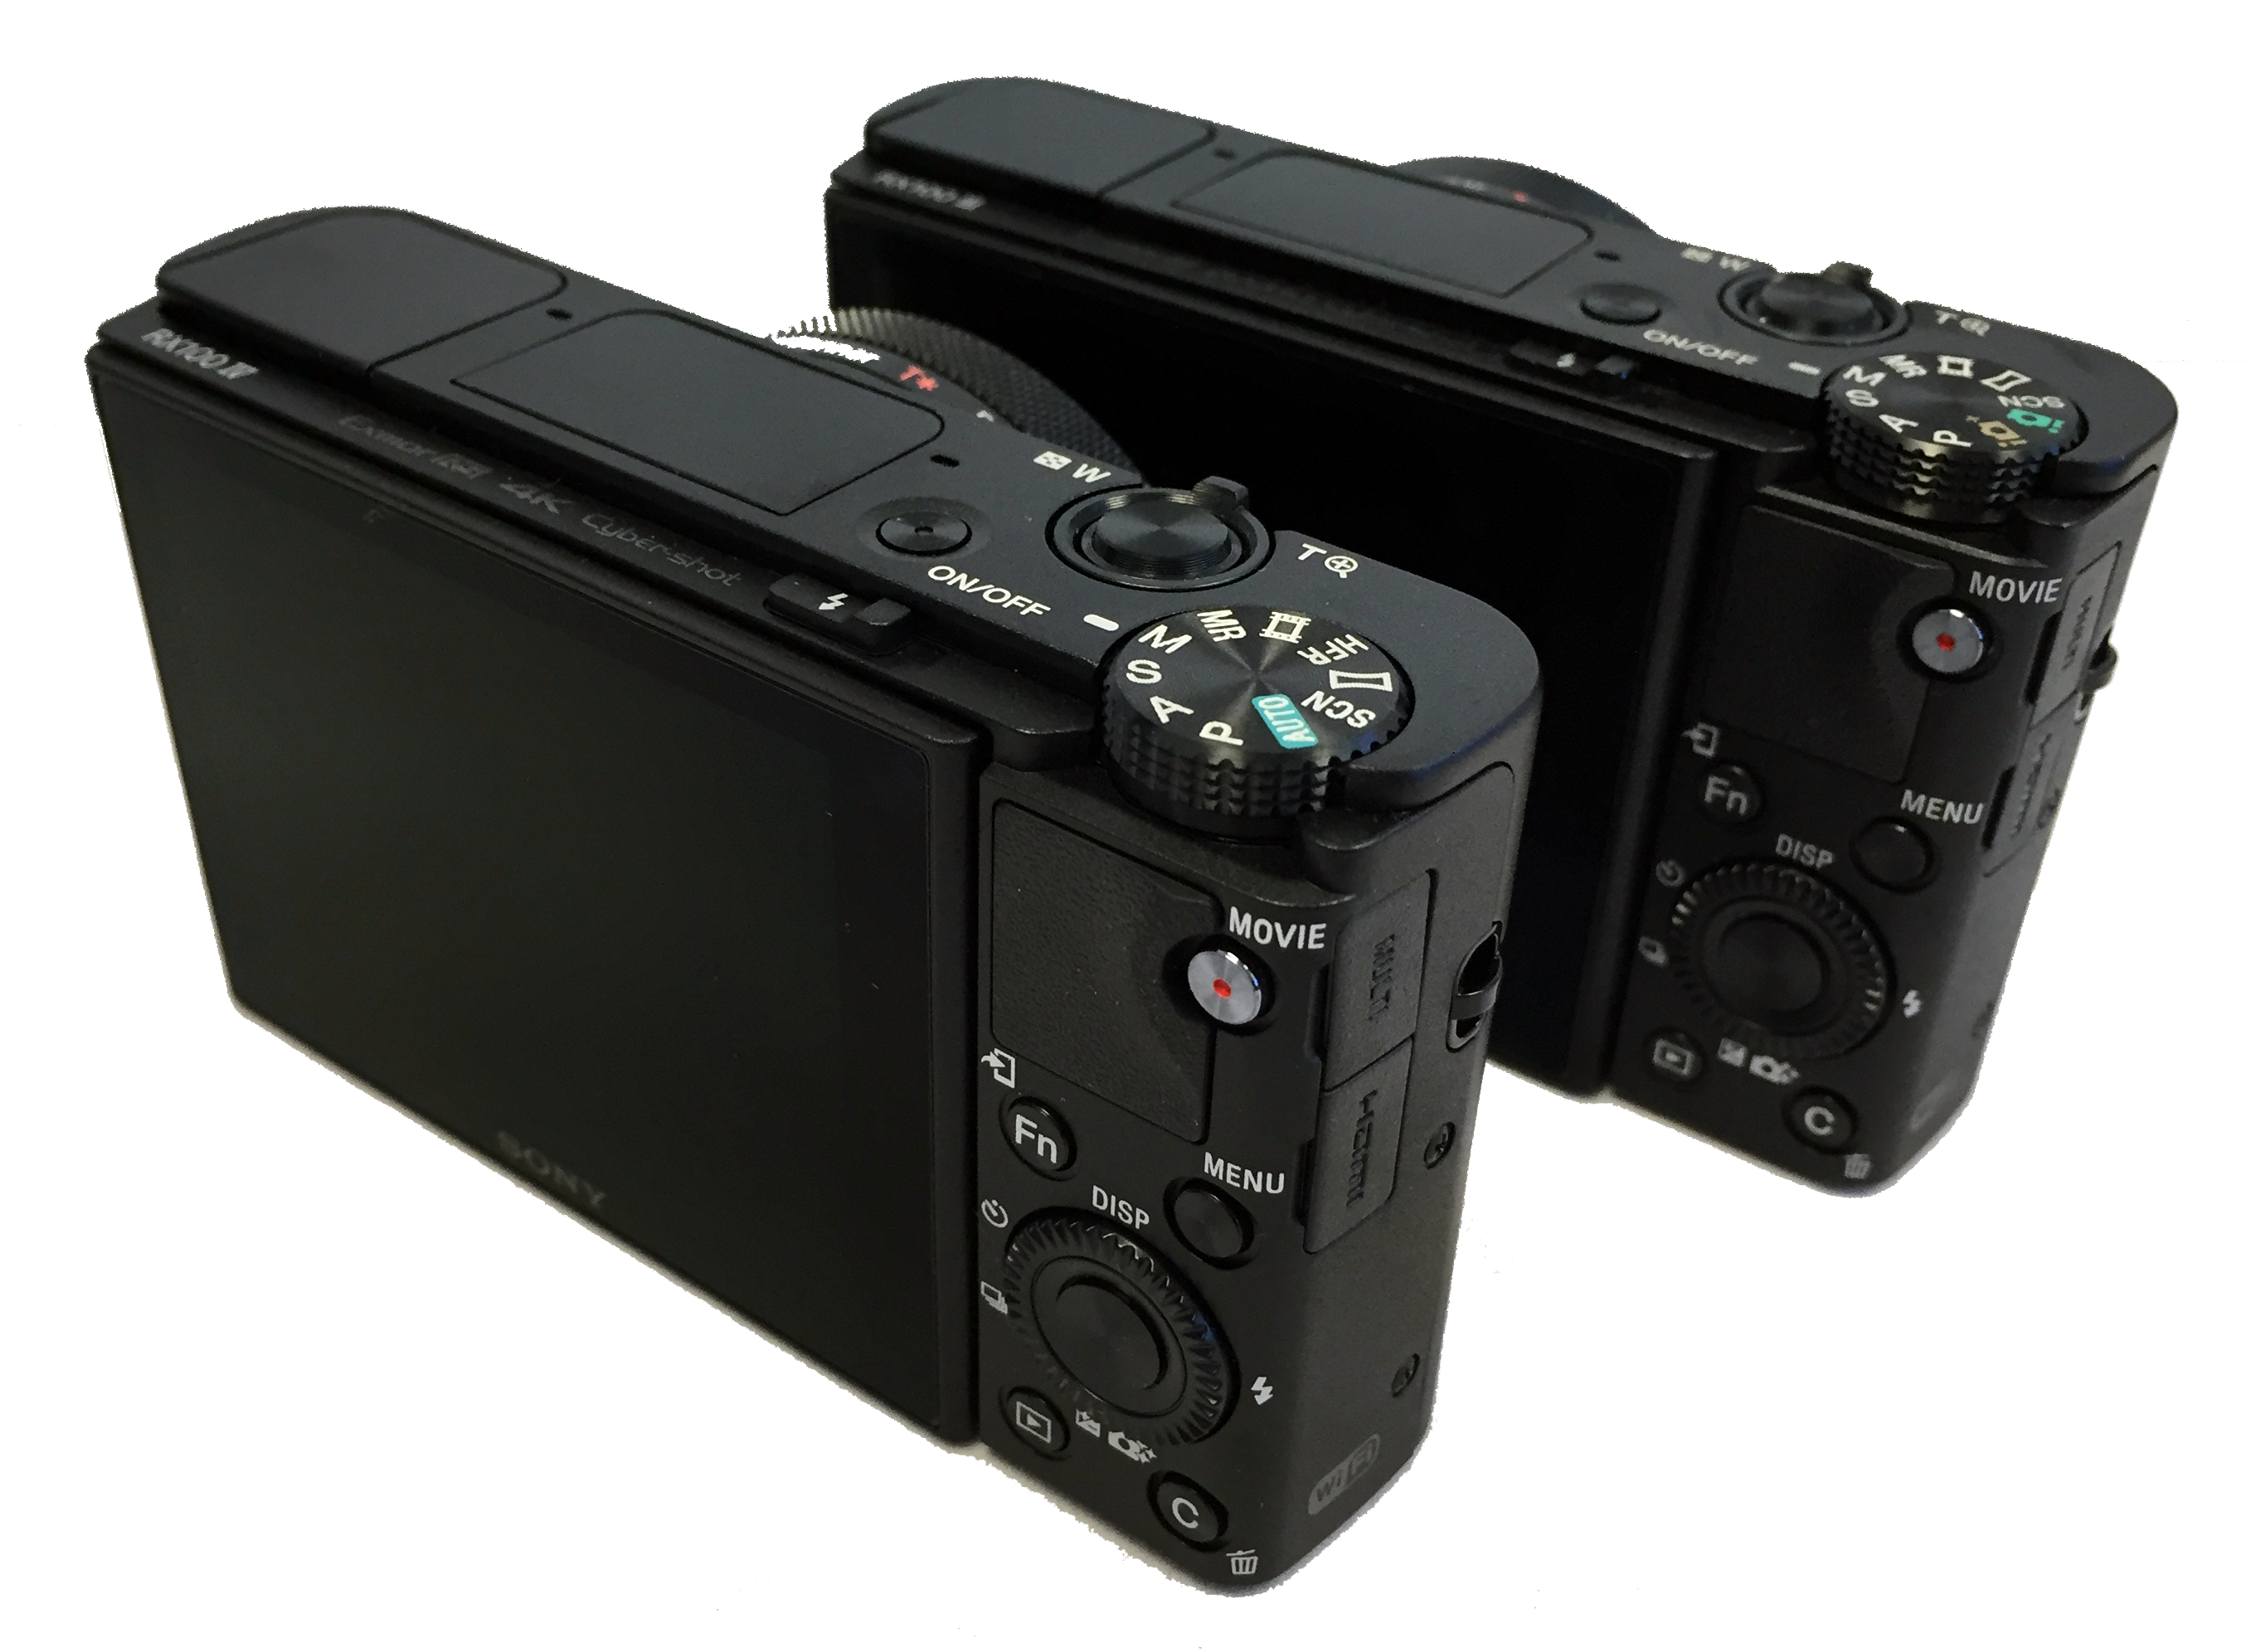 Sony RX100 IV – Will it fit??